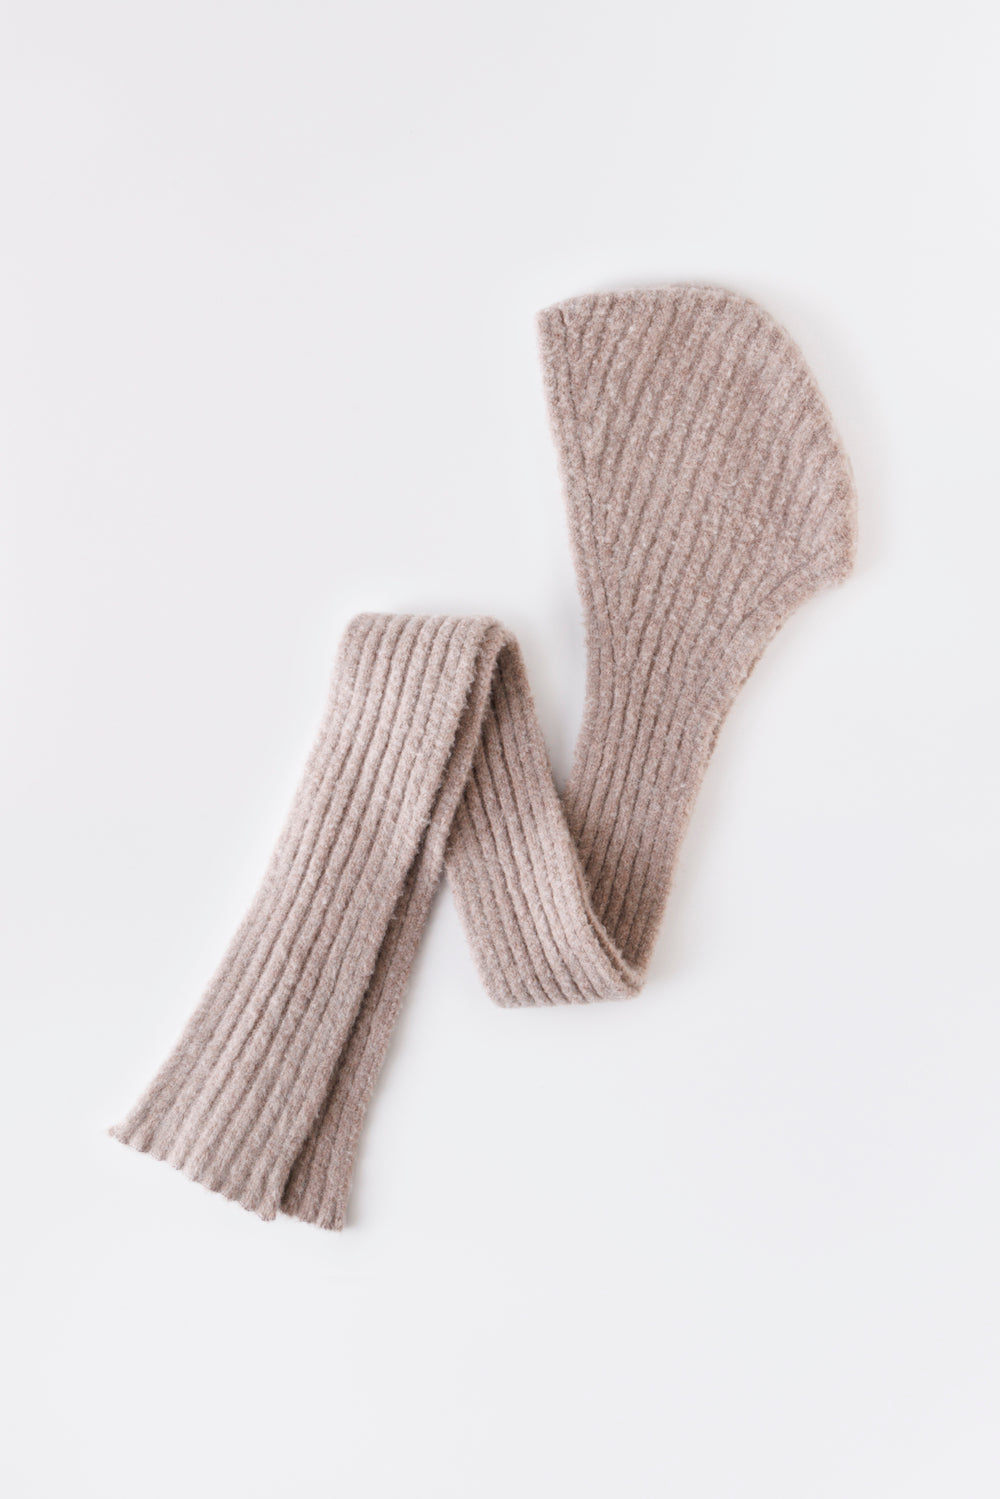 WOOL CASHMERE KNIT HOODED SCARF - FETICO